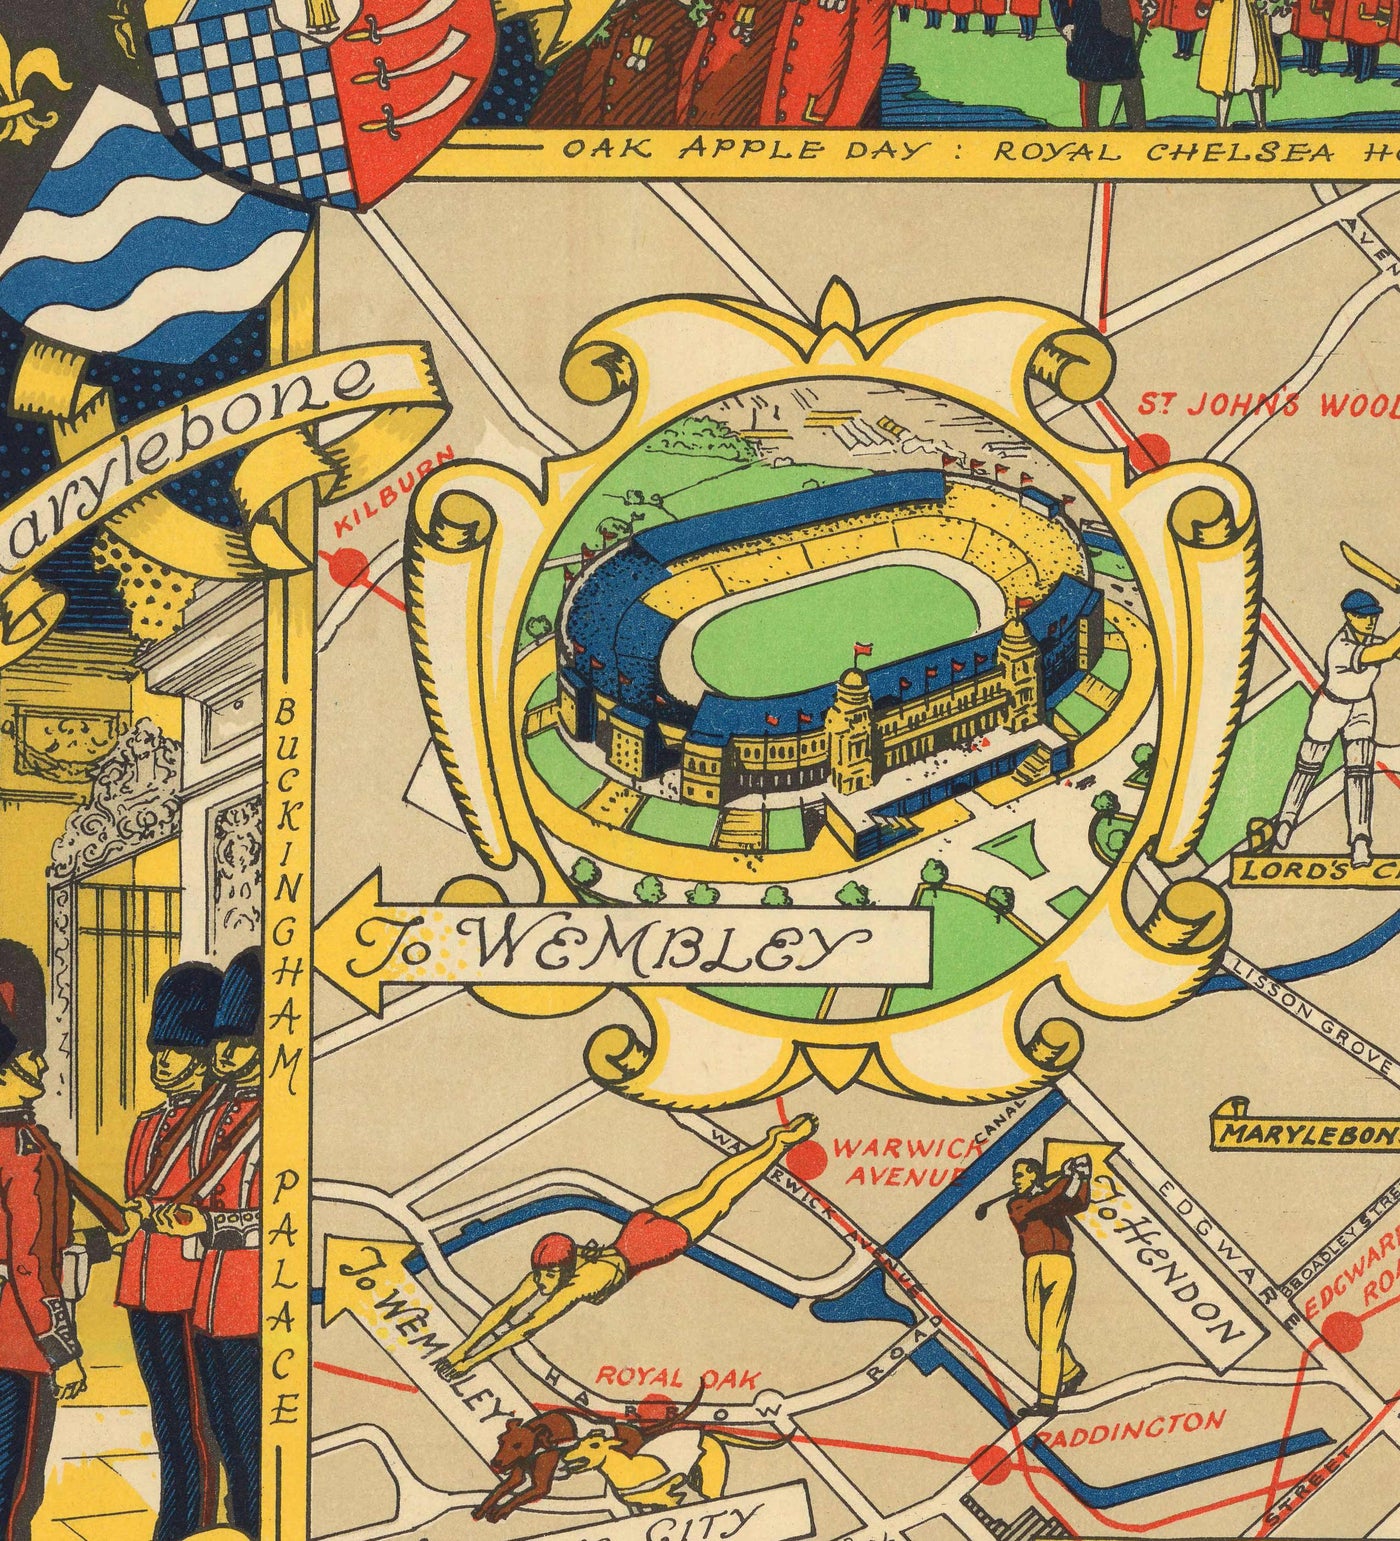 Old Map of Central London, 1951 - Festival of Britain, Royal Festival Hall, Landmarks, South Bank